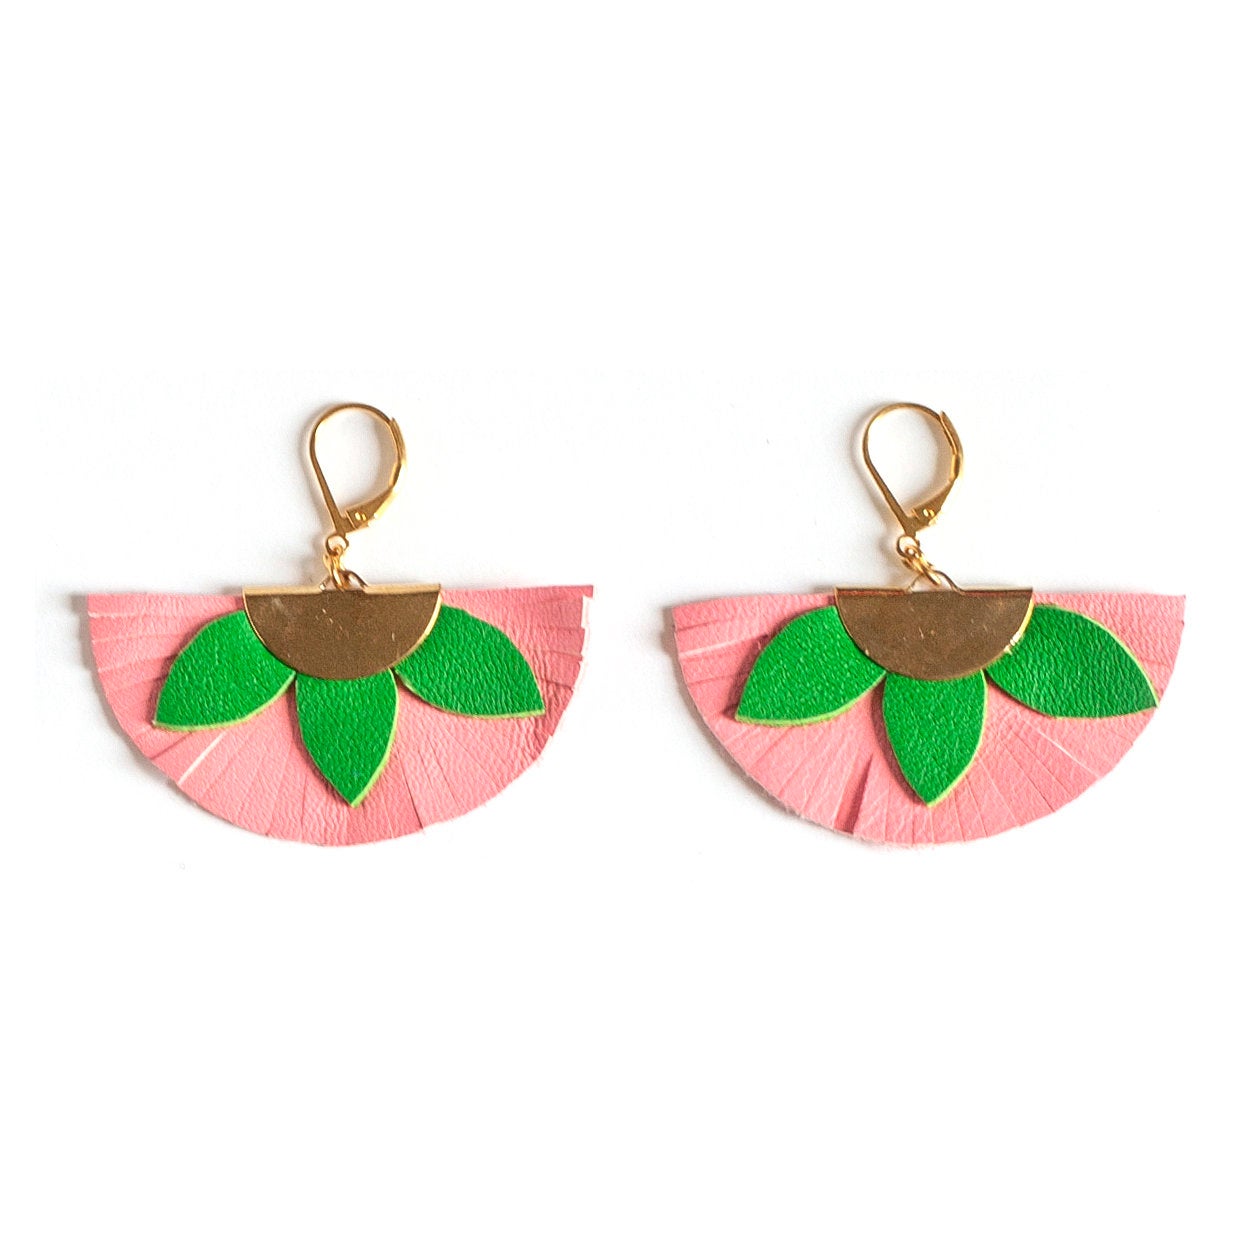 Pink and green leather half-circle earrings